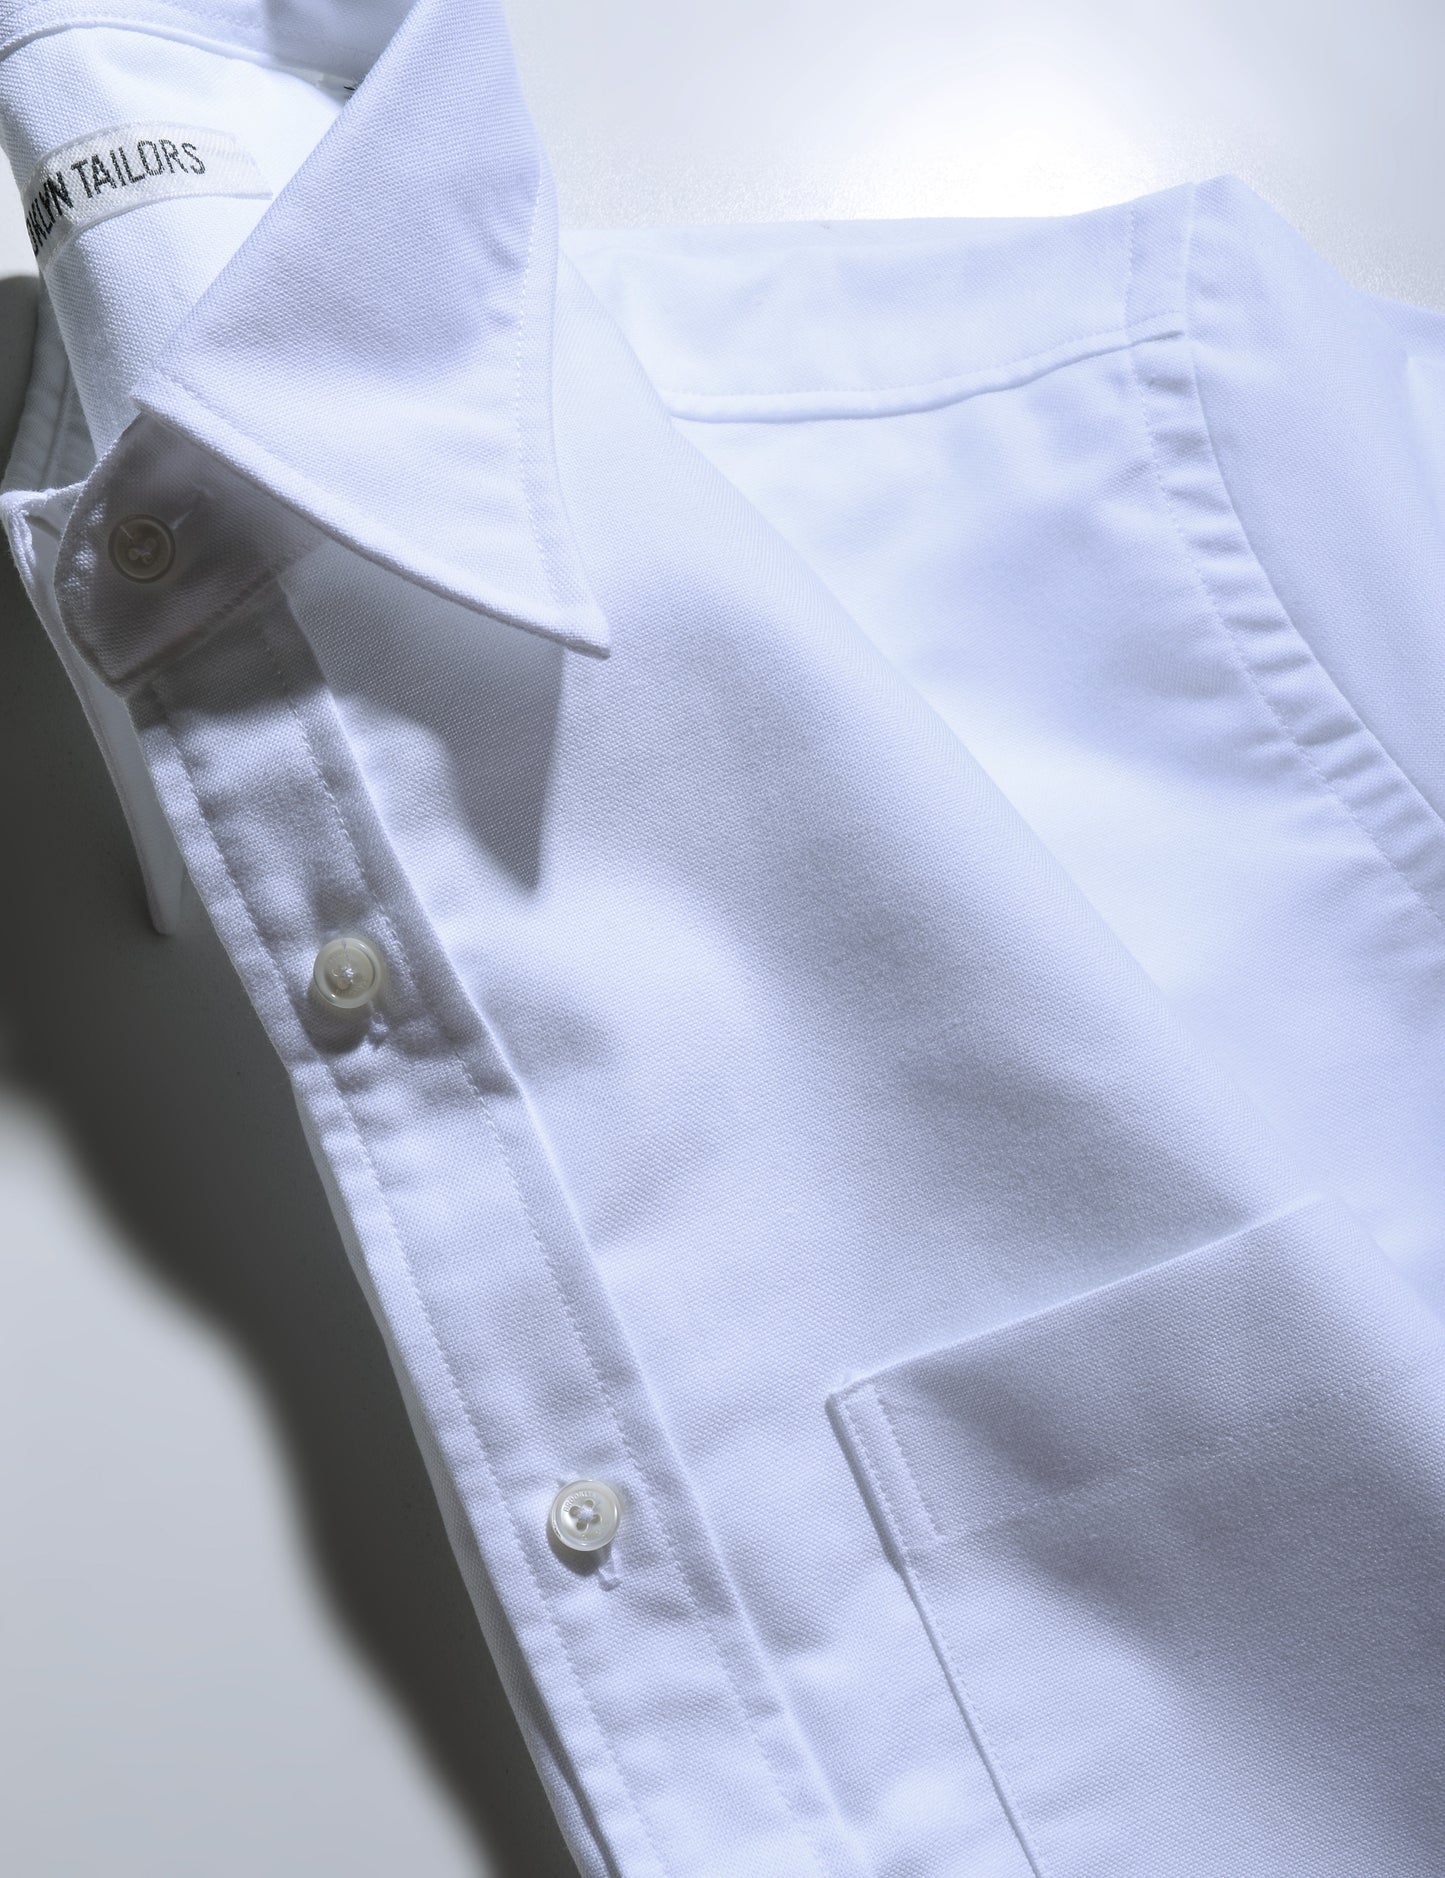 BKT14 Relaxed Shirt in Oxford - Bright White